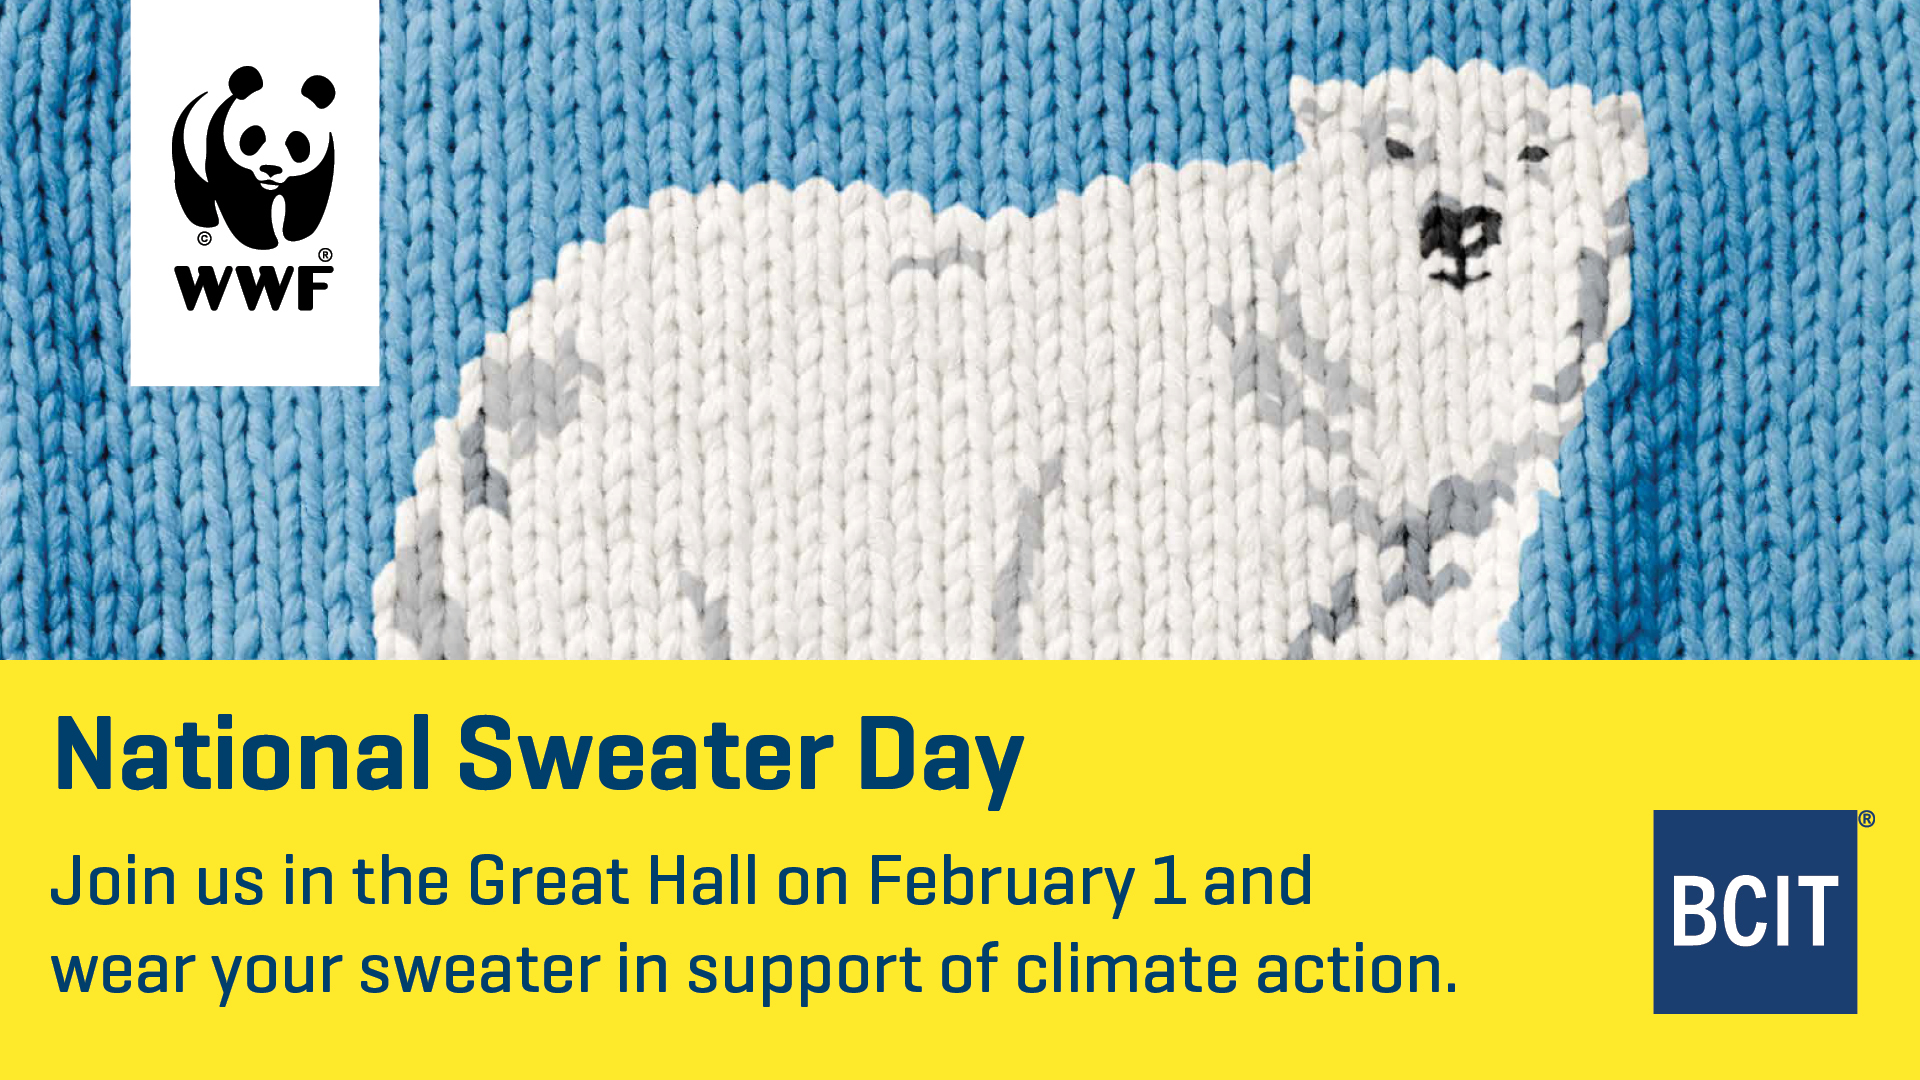 Promotional image for sweater day showing an image of a knit polar bear.